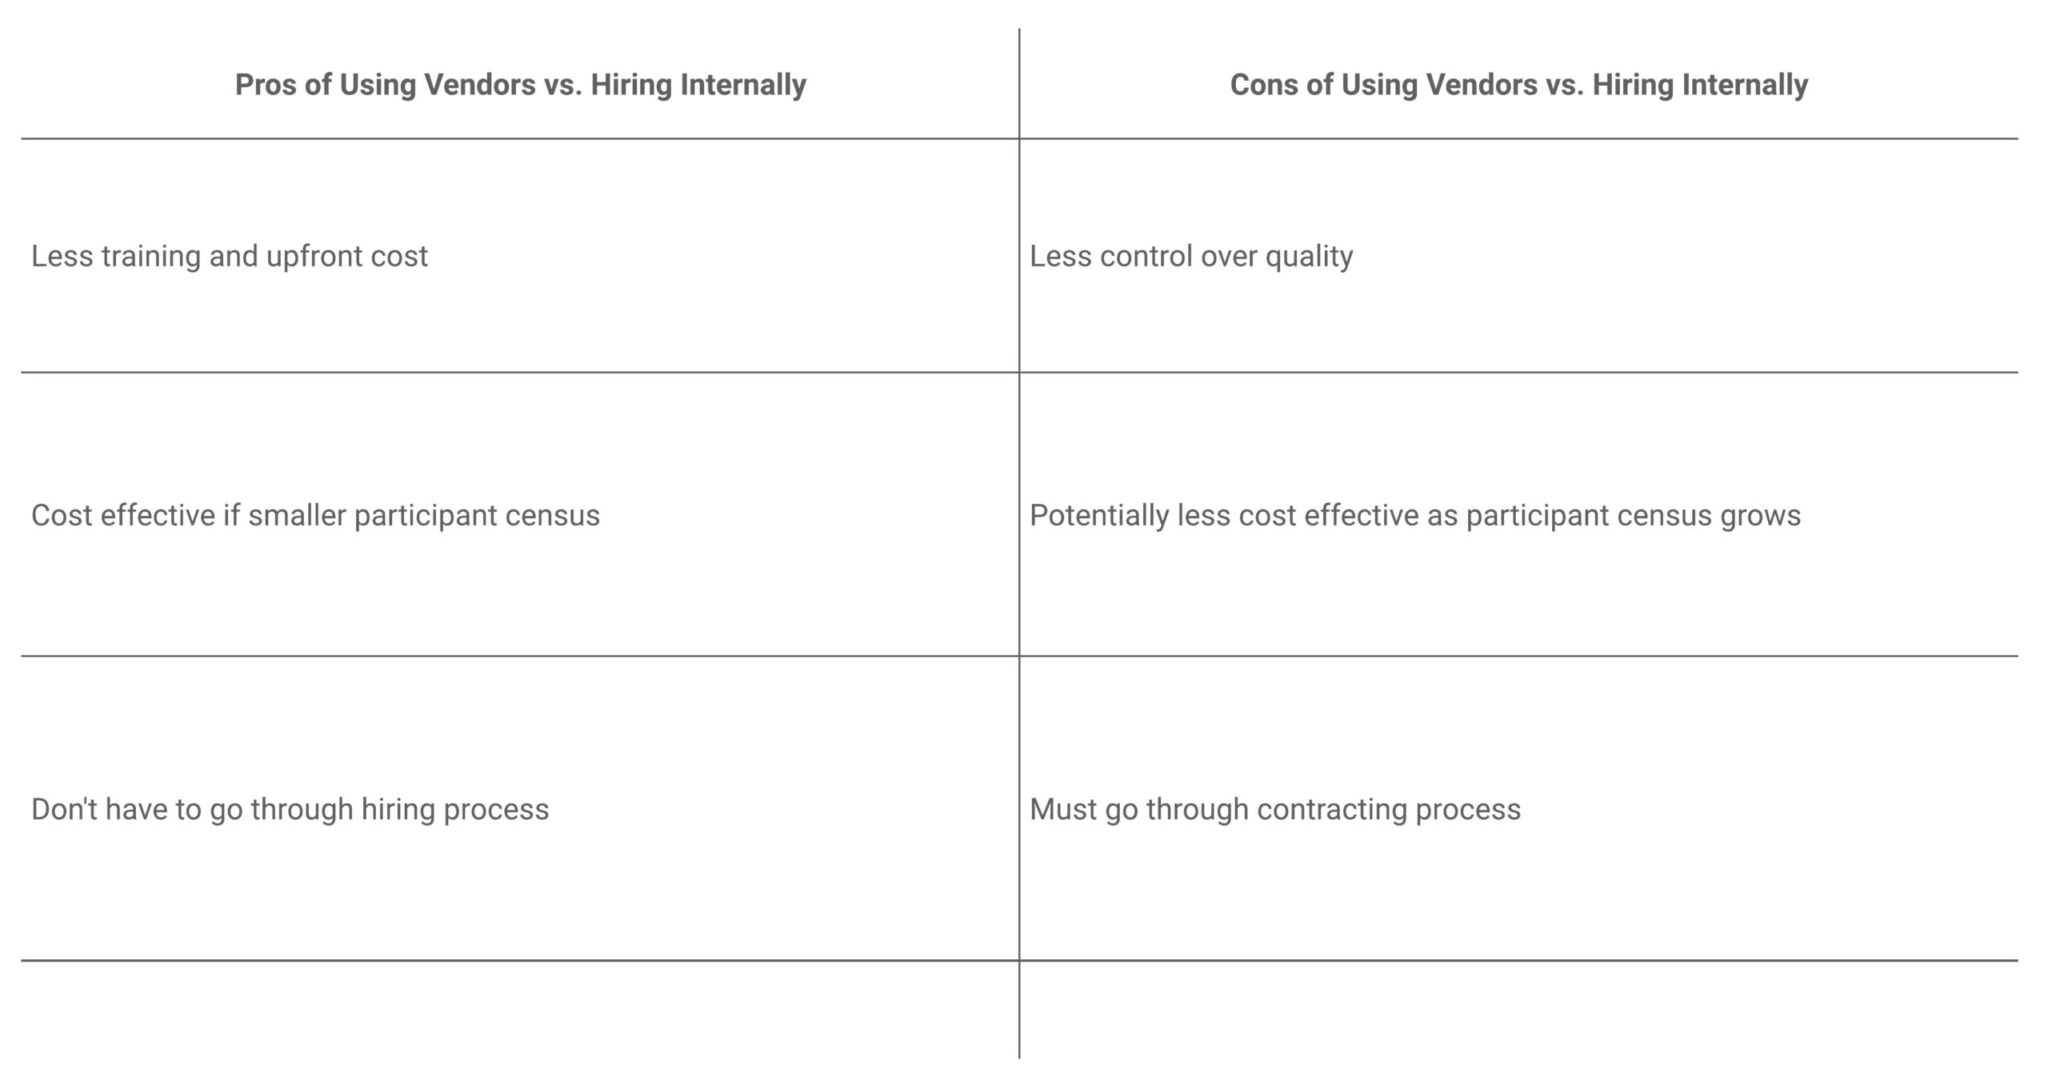 Table graph about the pros and cons when using vendors vs hiring internally for PACE services